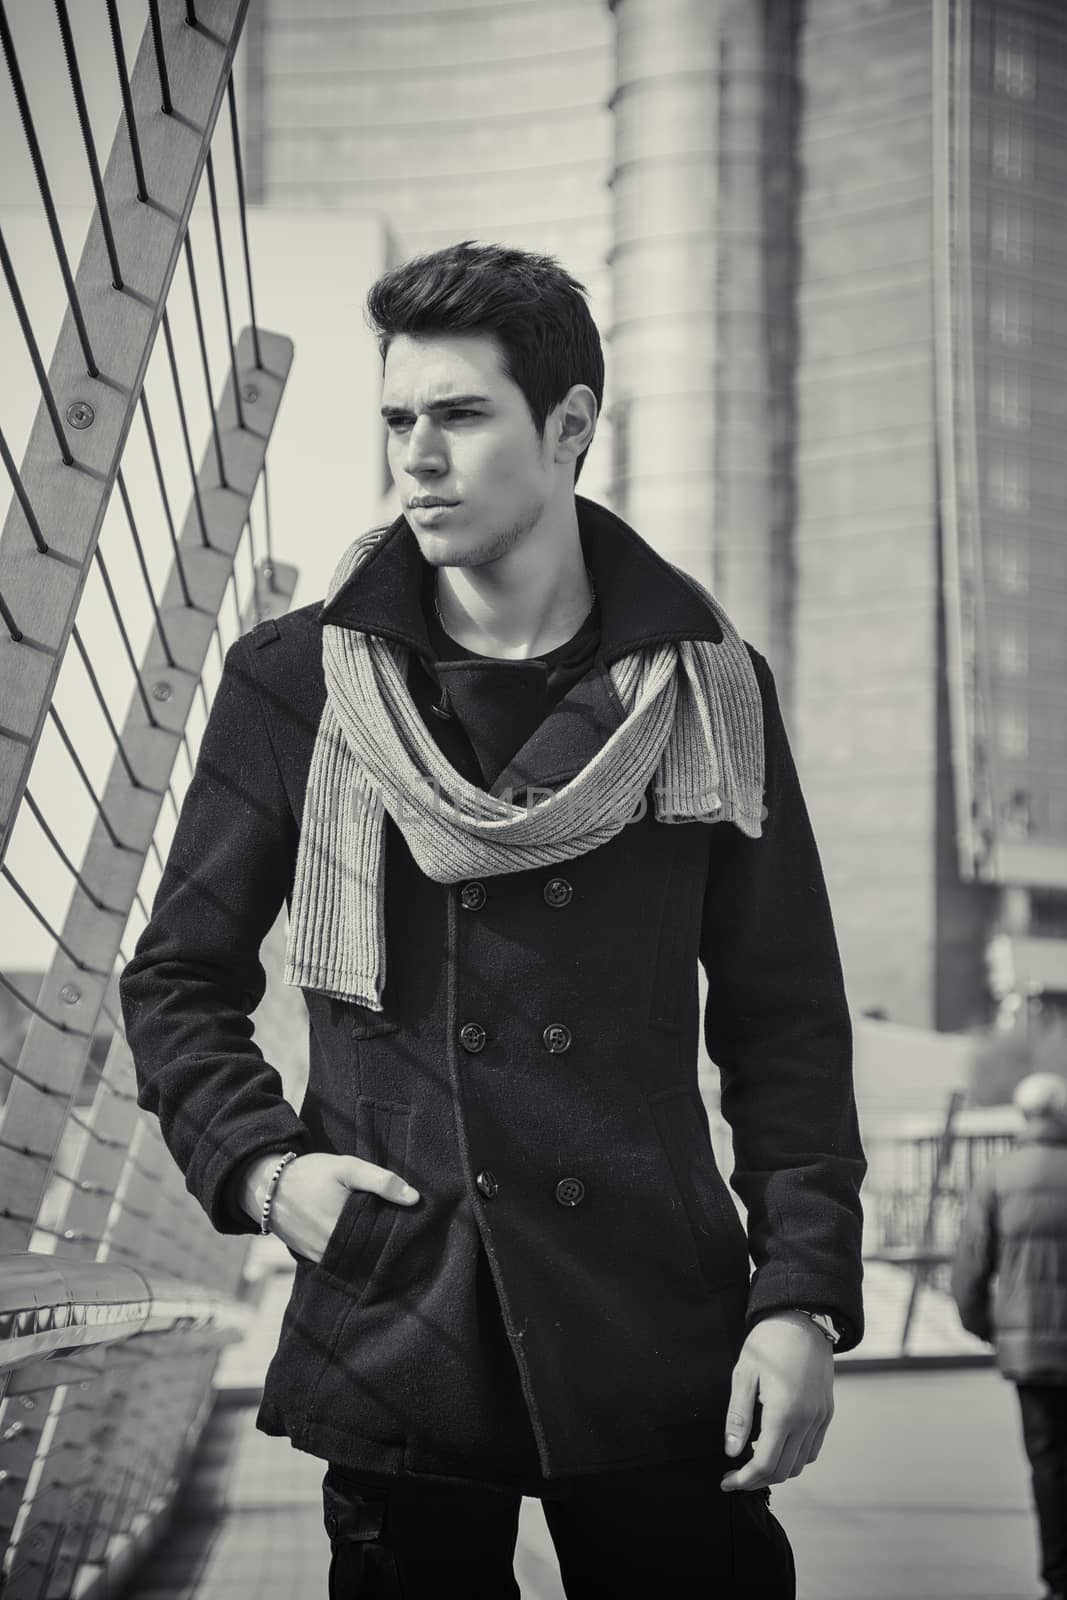 Stylish Young Handsome Man in Black Coat Standing in City Center Street by artofphoto